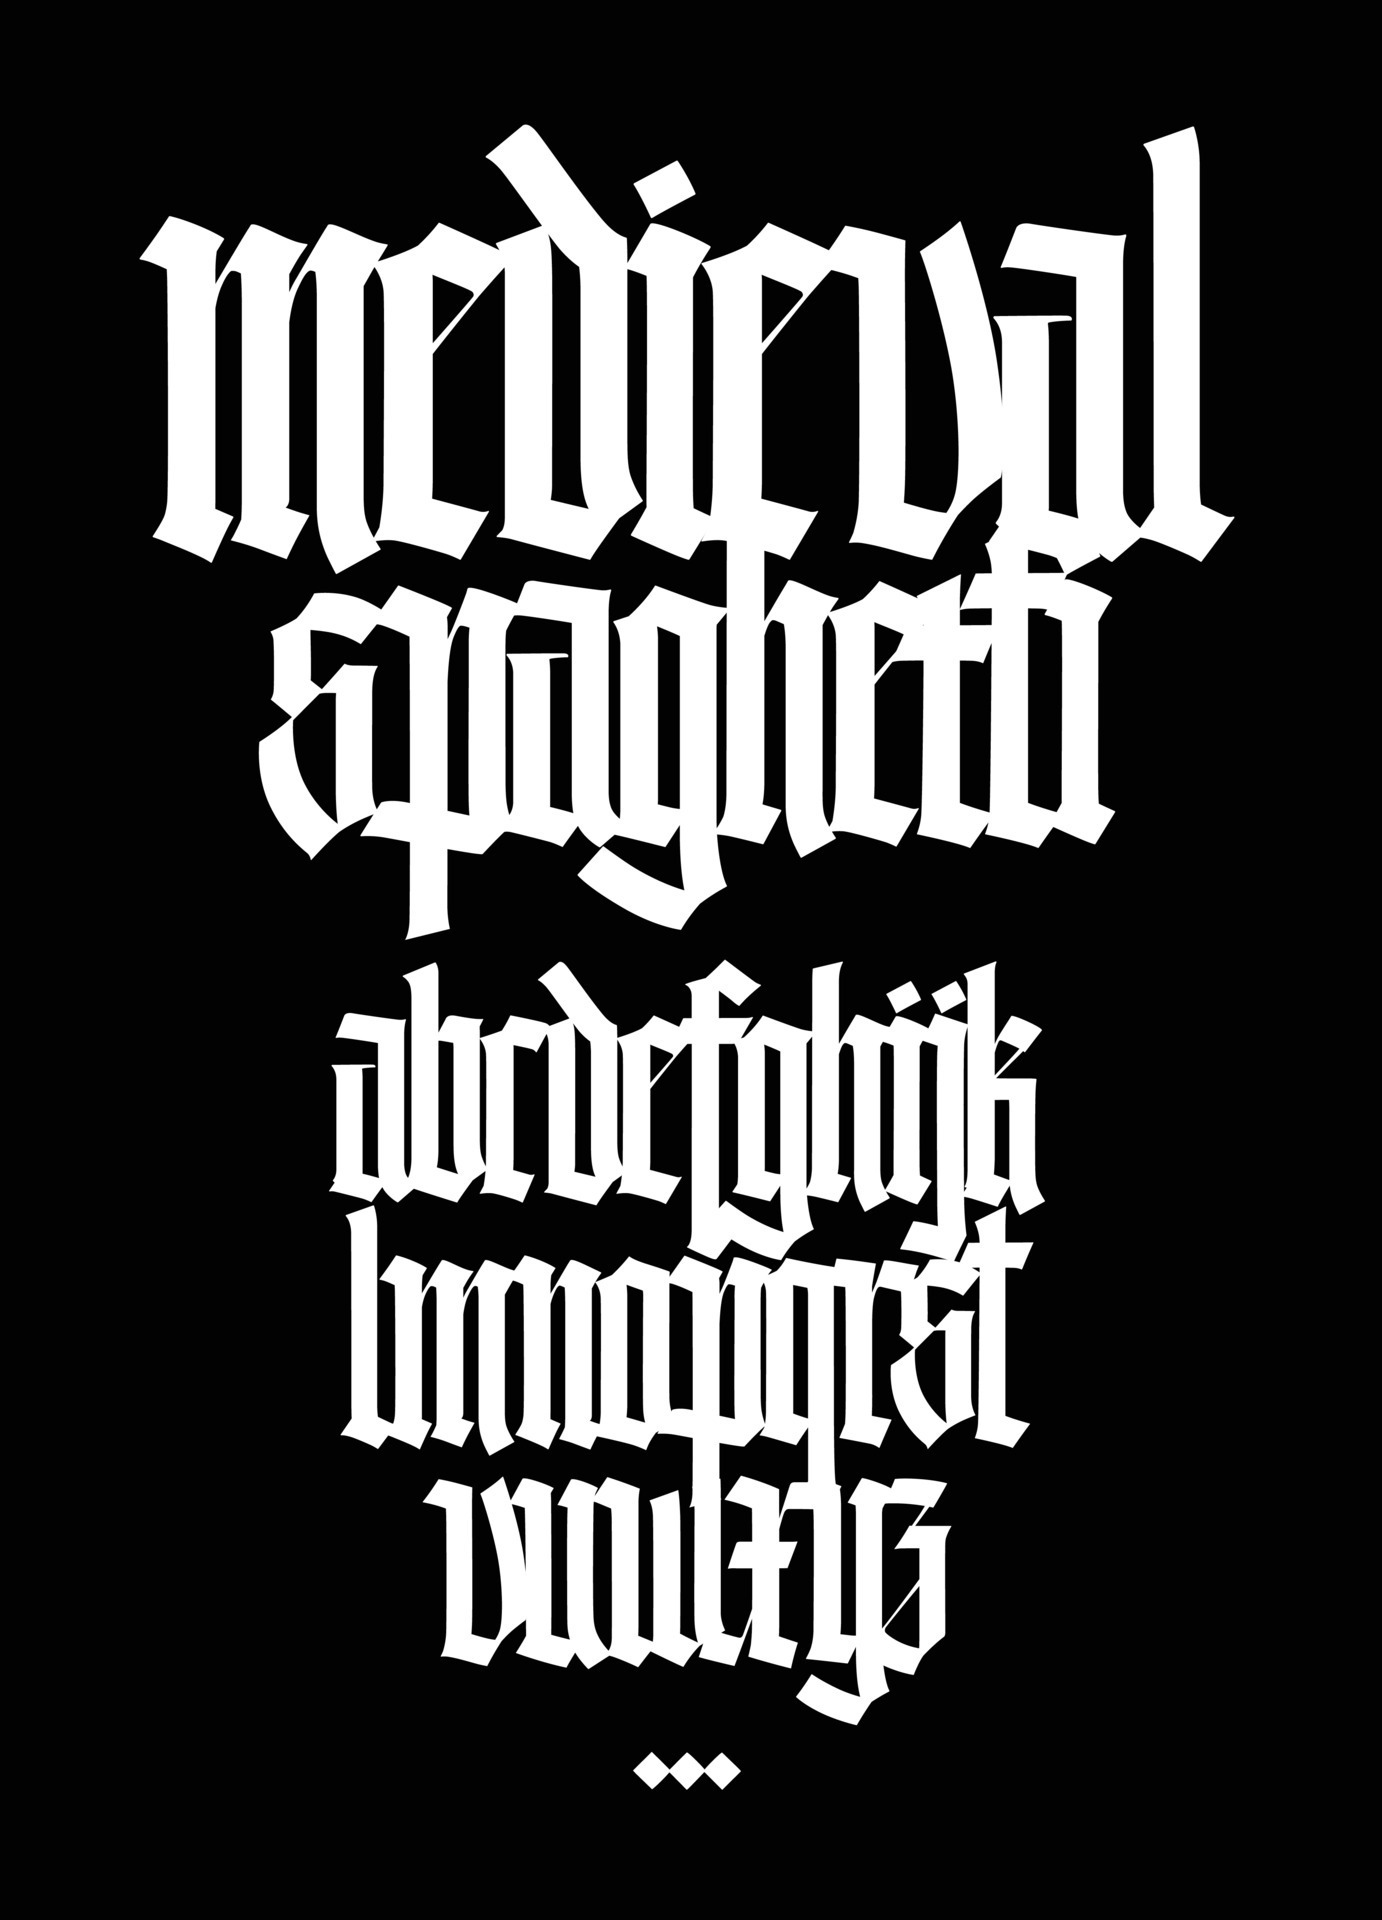 https://static.vecteezy.com/system/resources/previews/016/412/288/original/gothic-english-alphabet-set-font-for-tattoo-personal-and-commercial-purposes-elements-are-isolated-on-a-black-background-calligraphy-and-lettering-individual-letters-vector.jpg